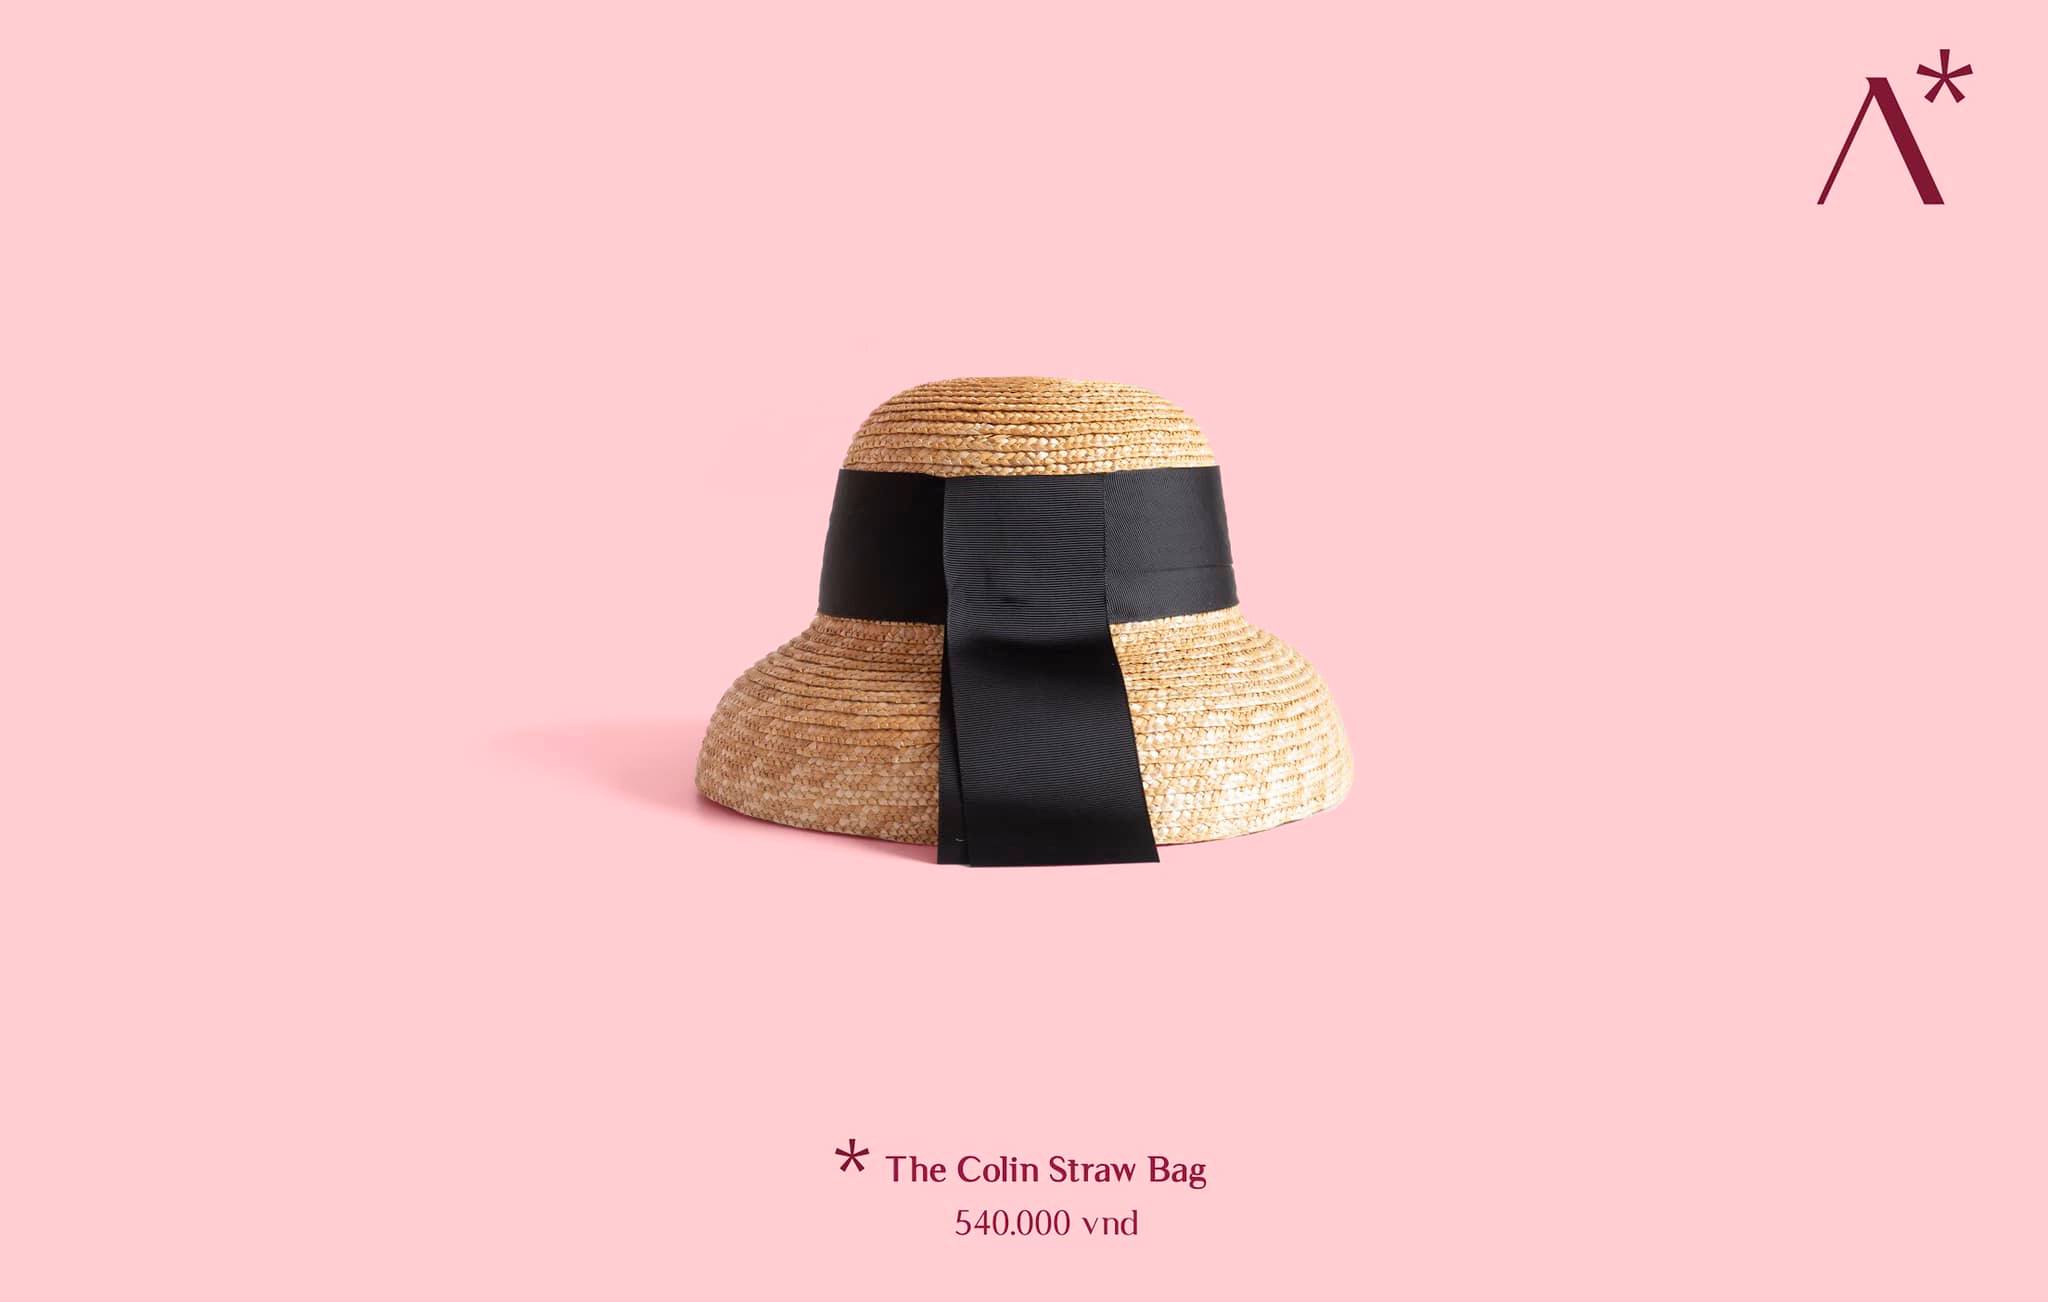 The Colin Straw Hat